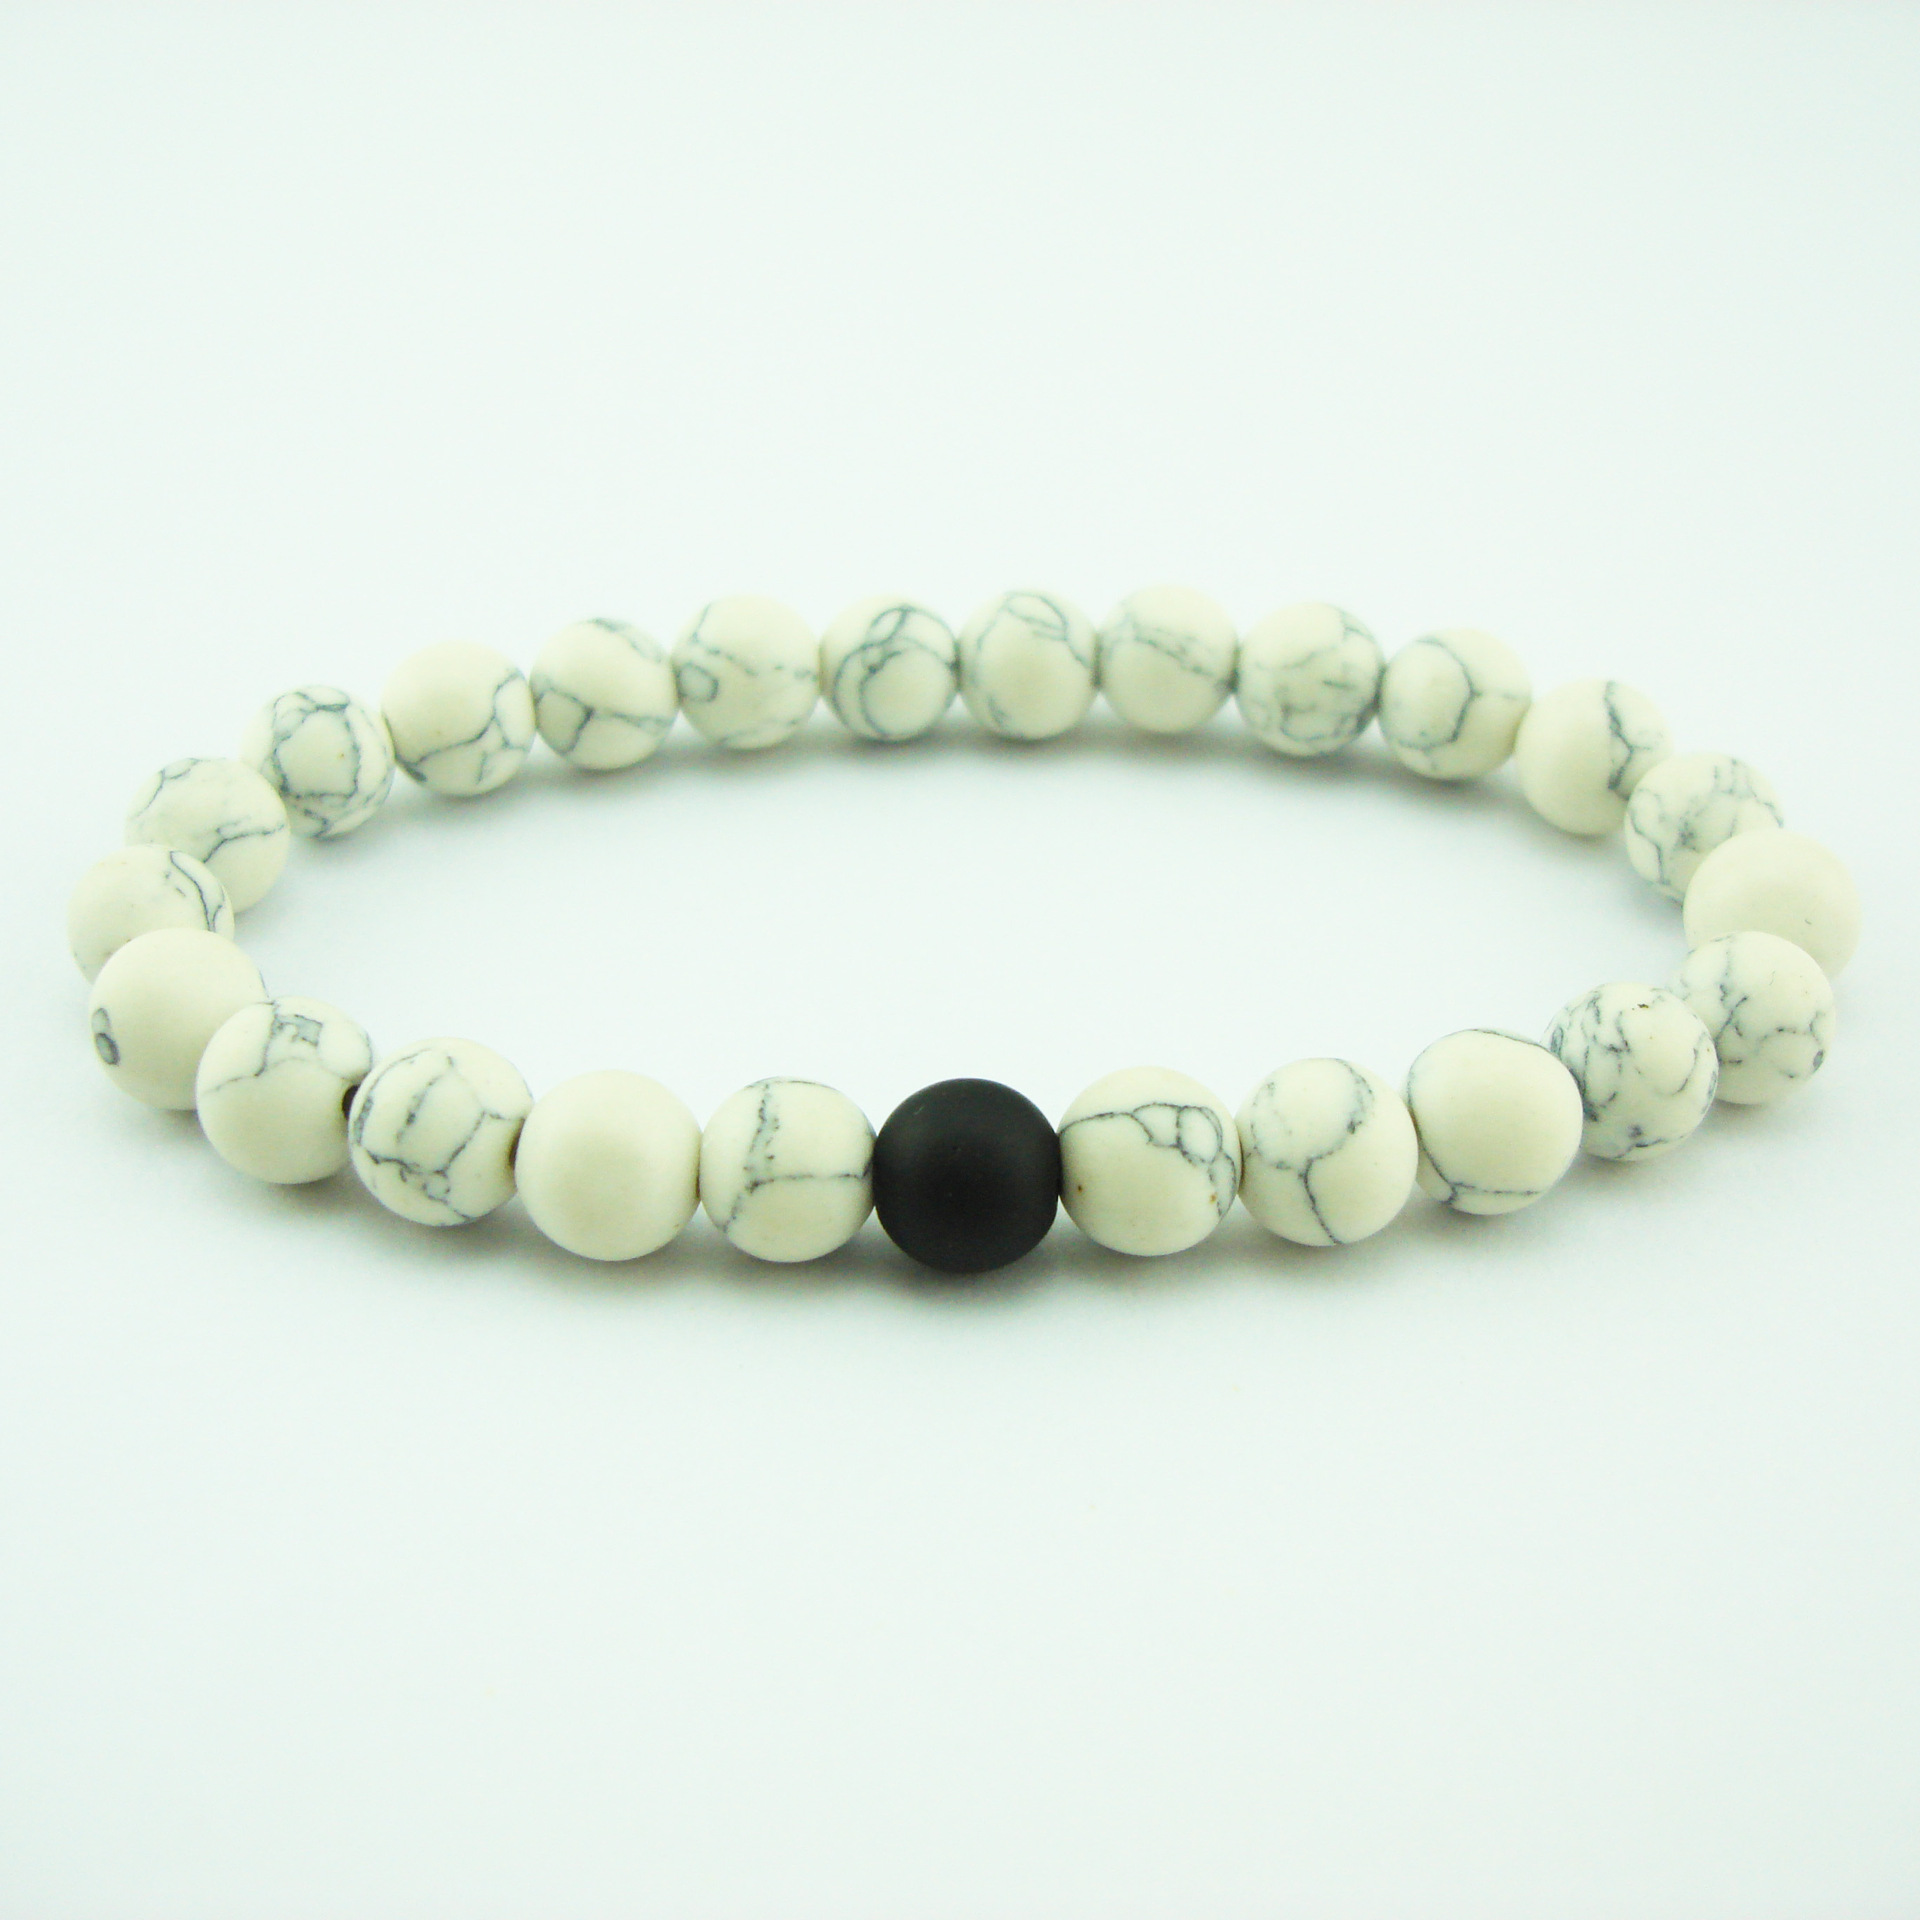 White turquoise and frosted black agate